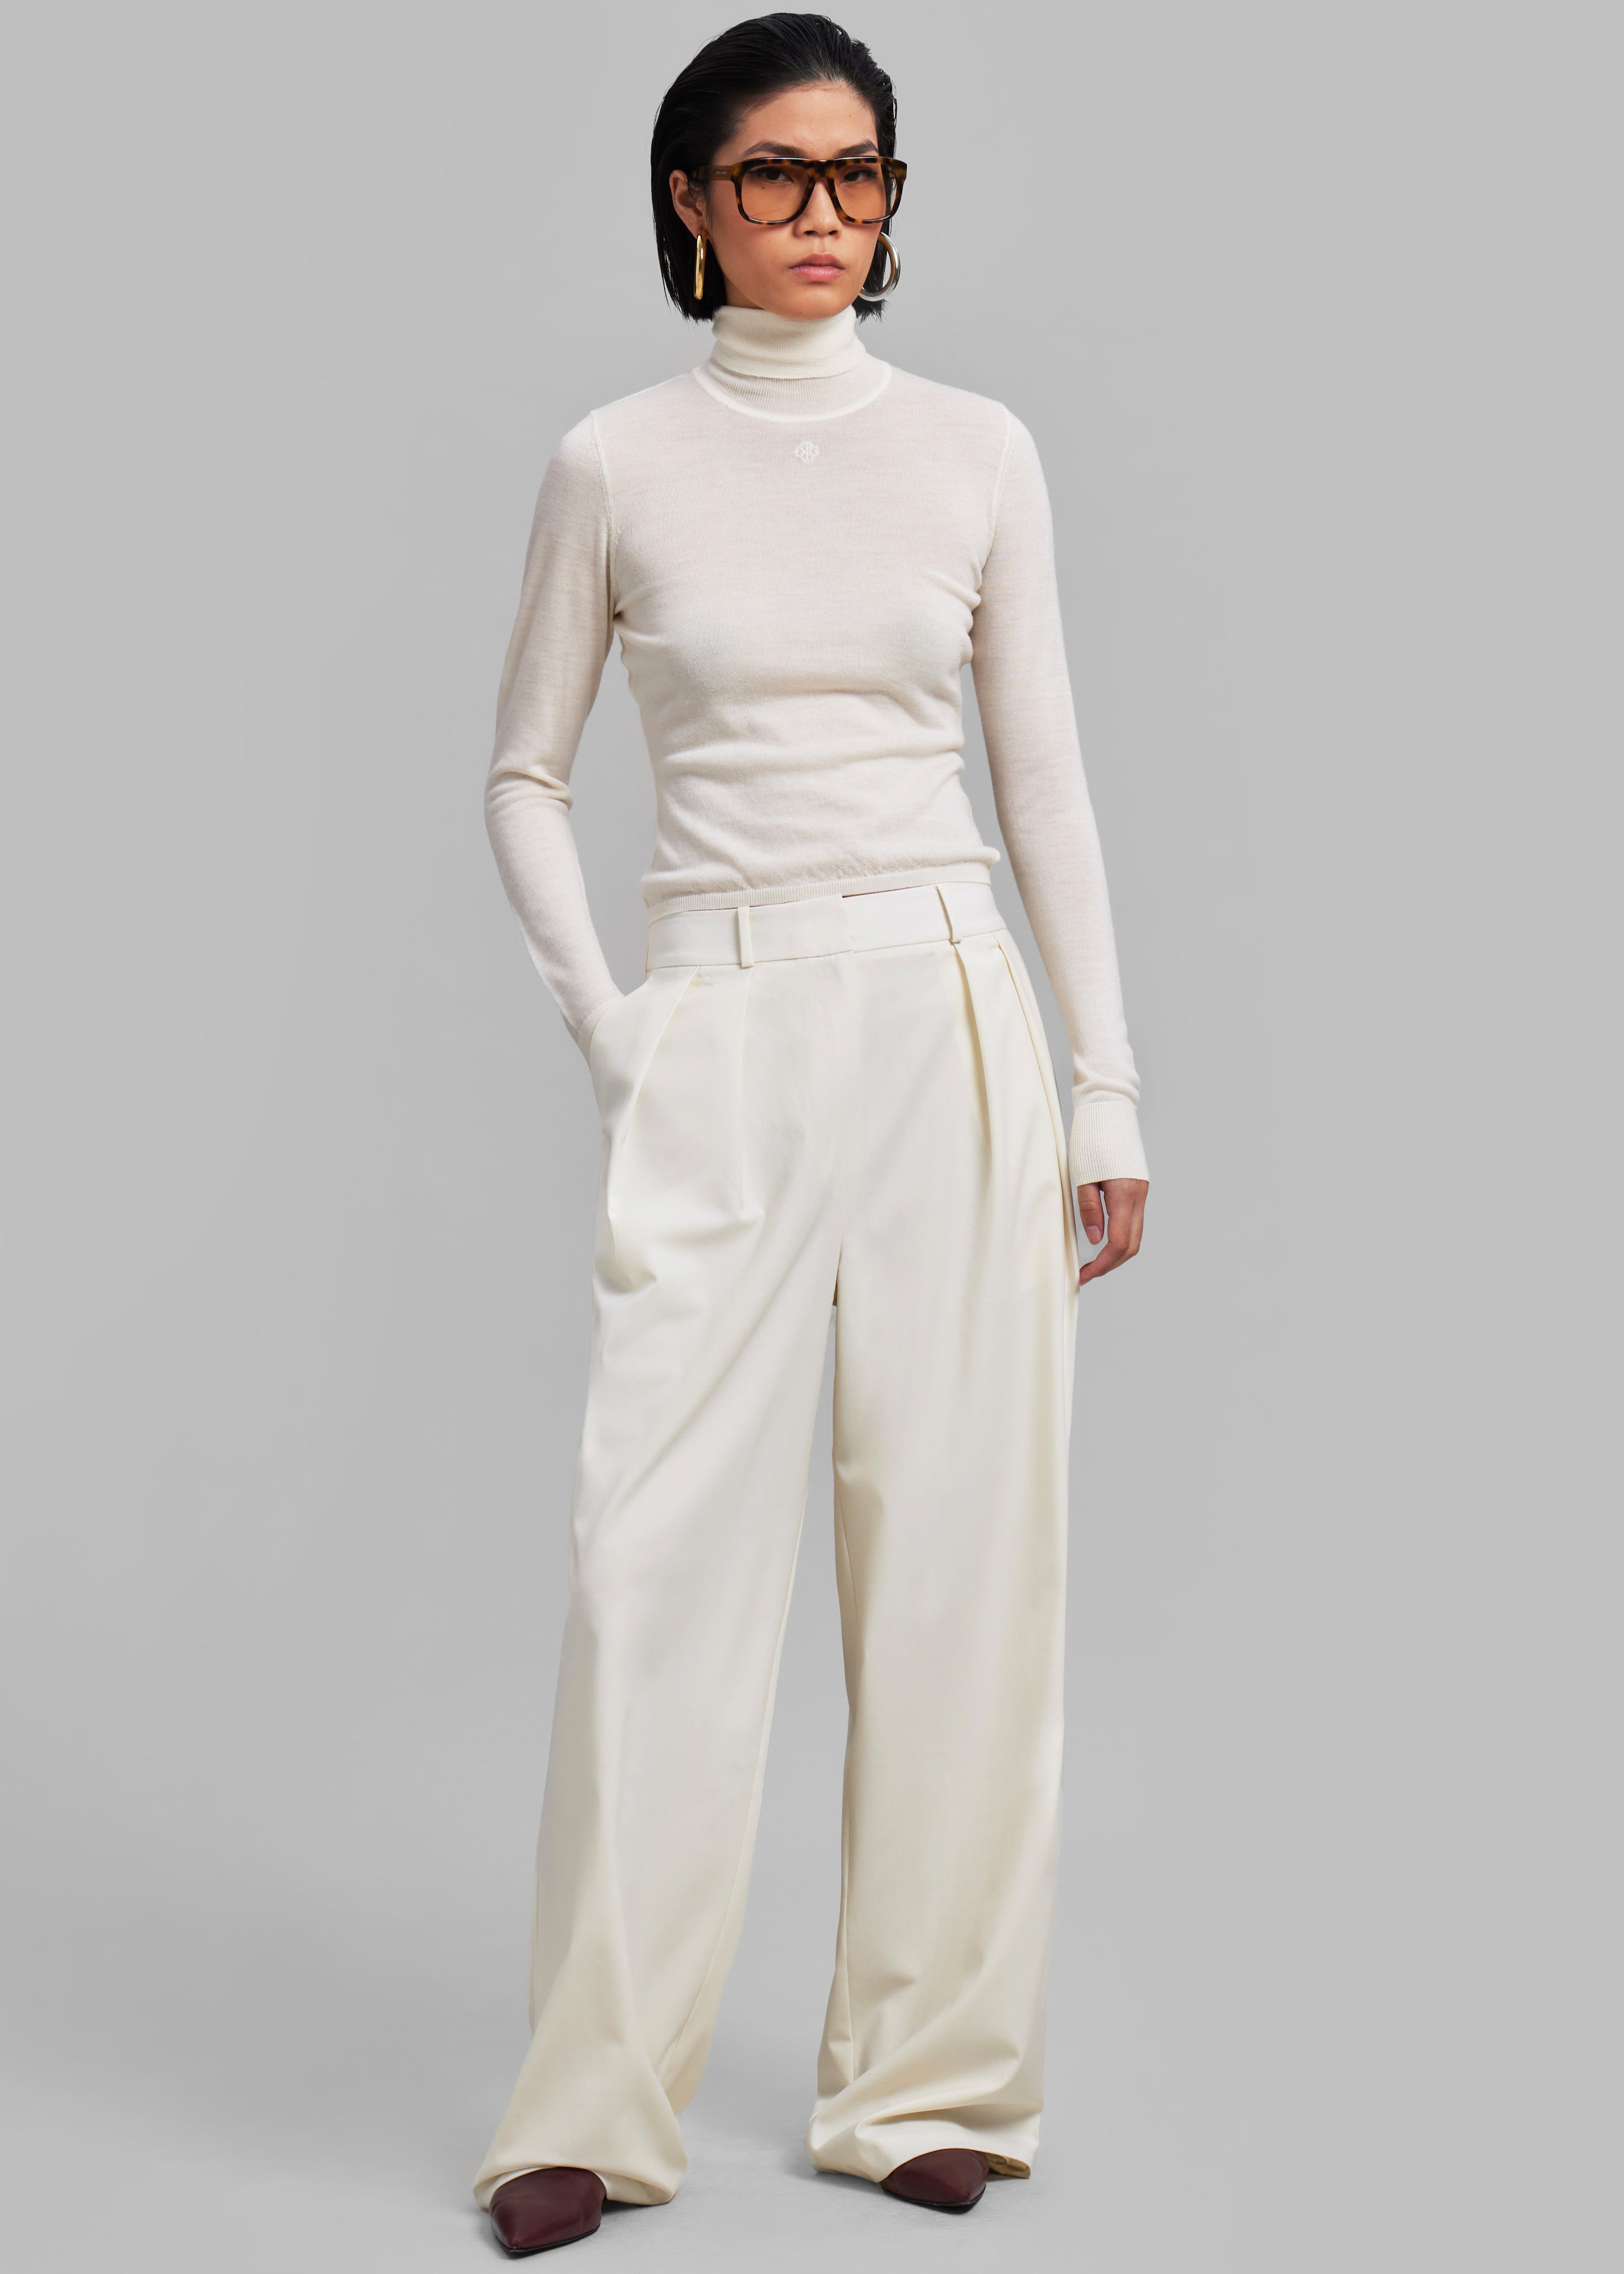 Ripley Pleated Trousers - Ivory - 4